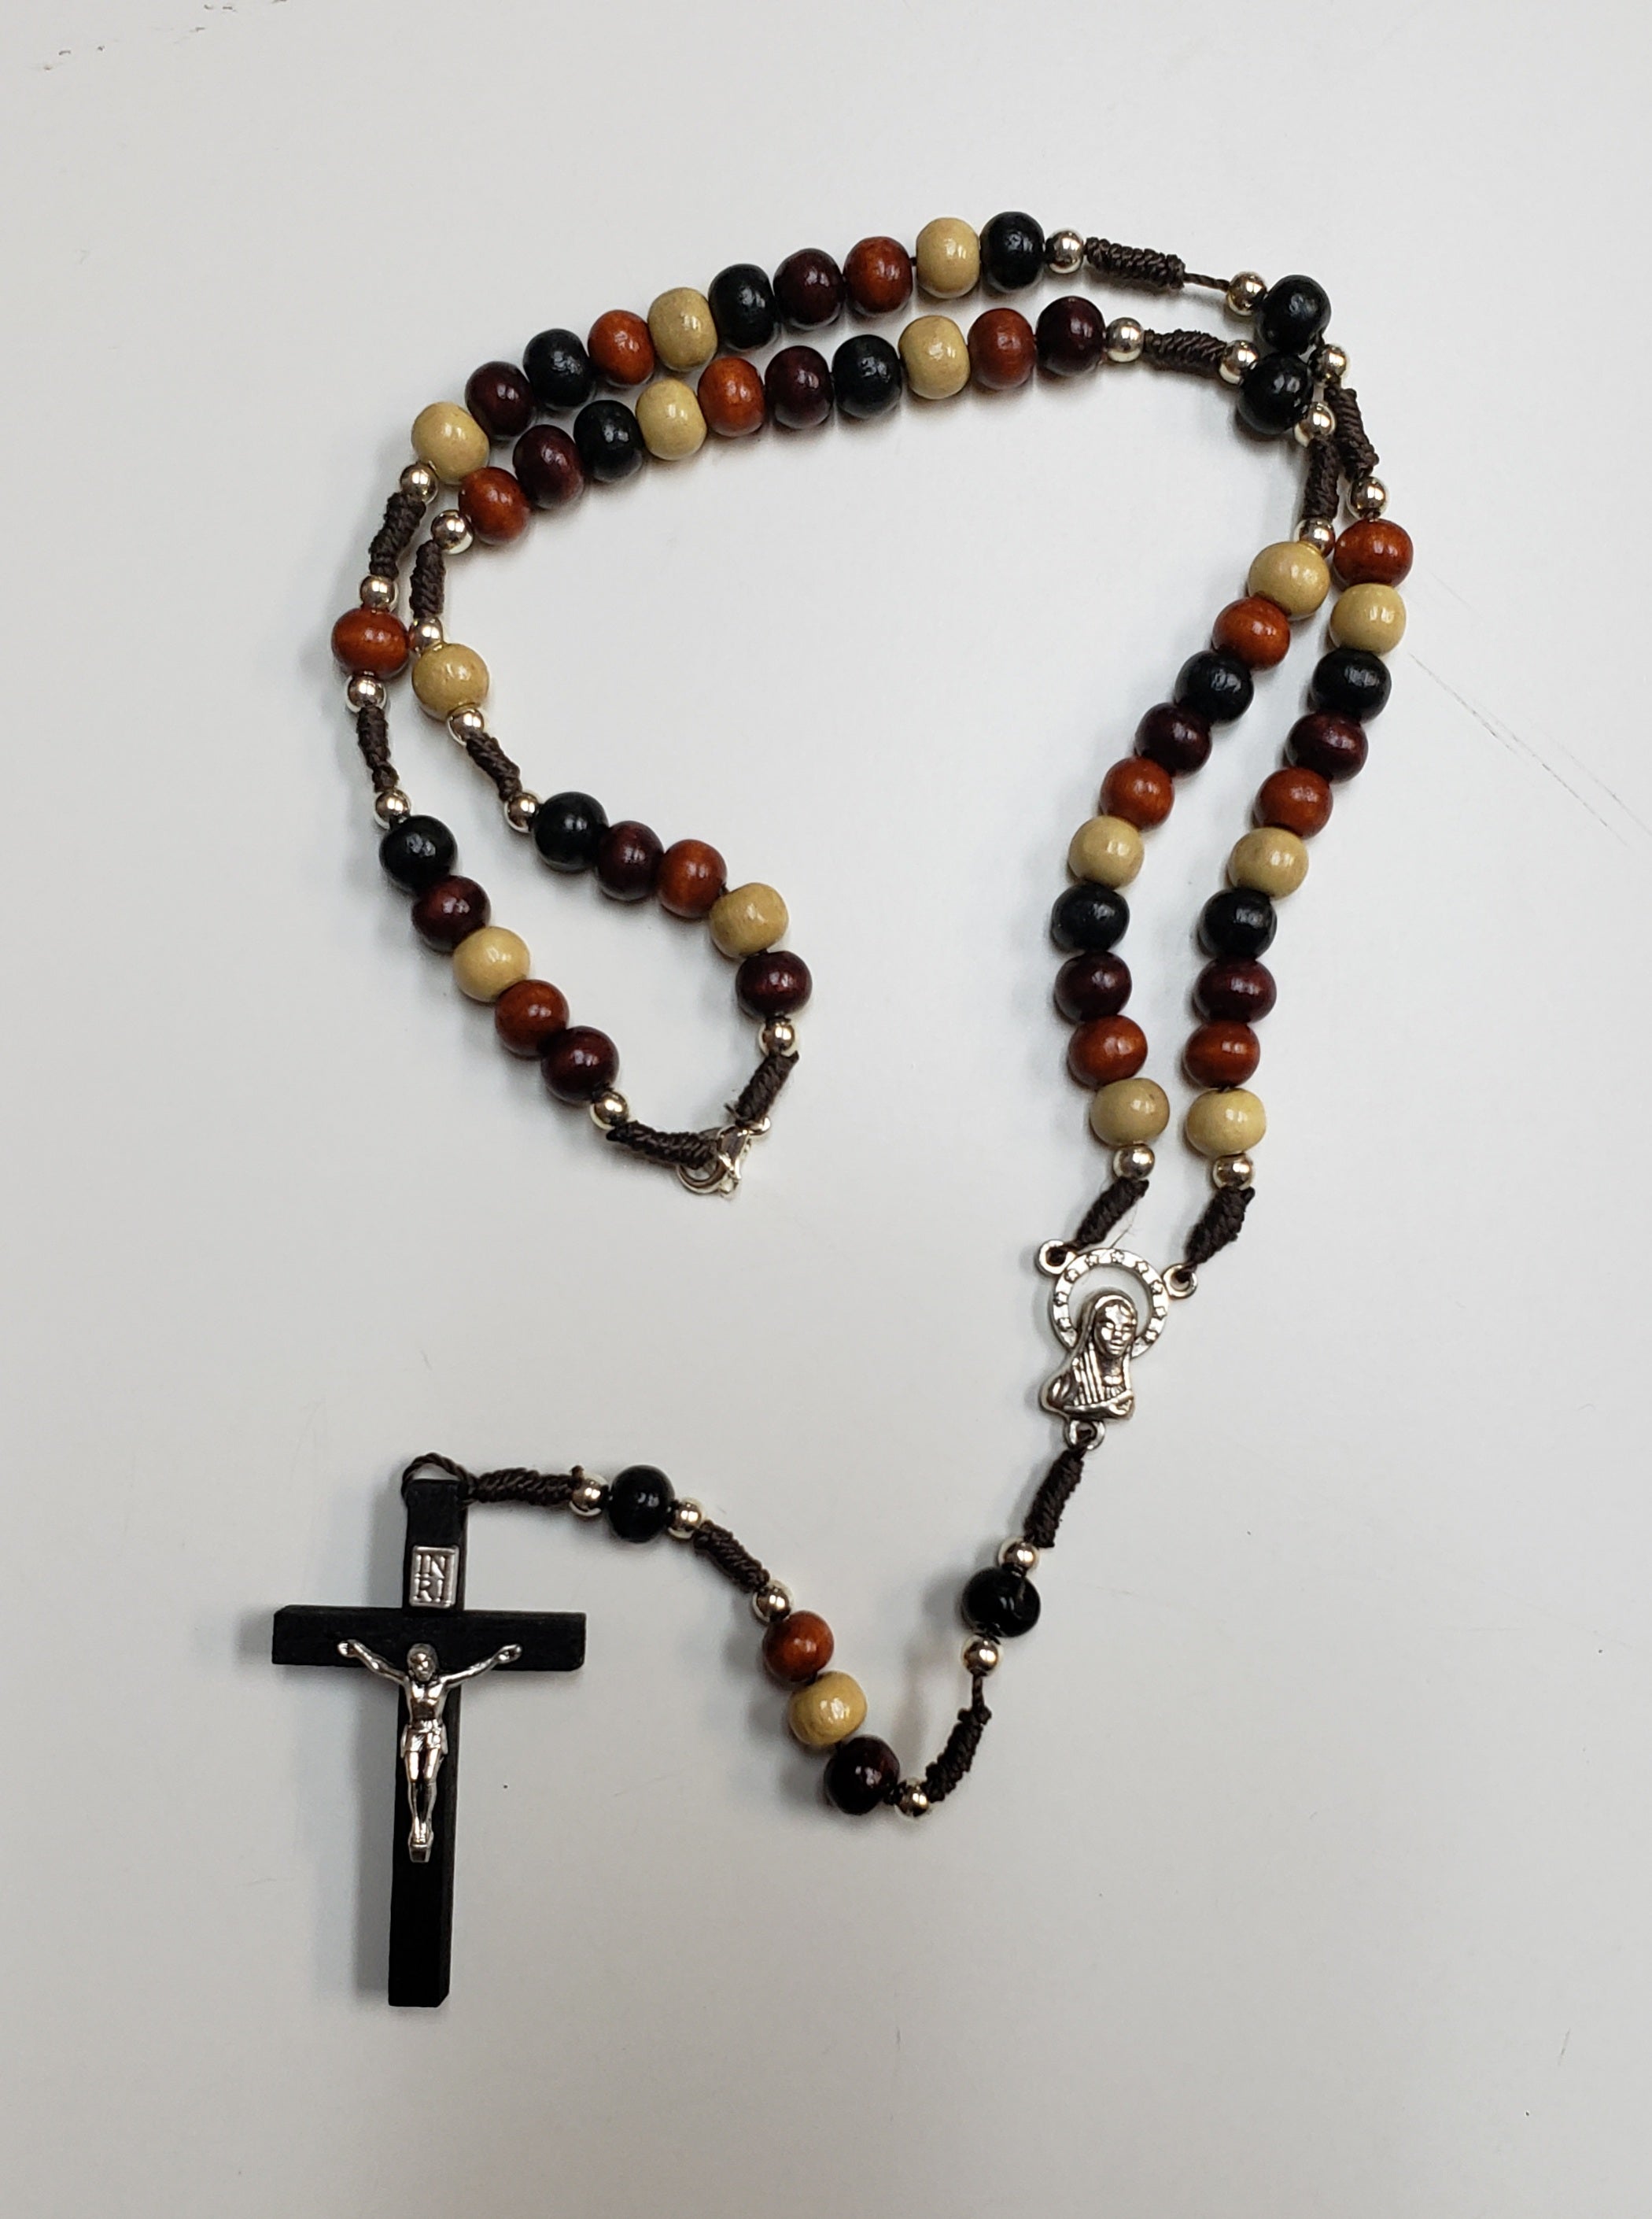 Wooden Rosary - Multi-color Wood Beads with Black Wood Crucifix